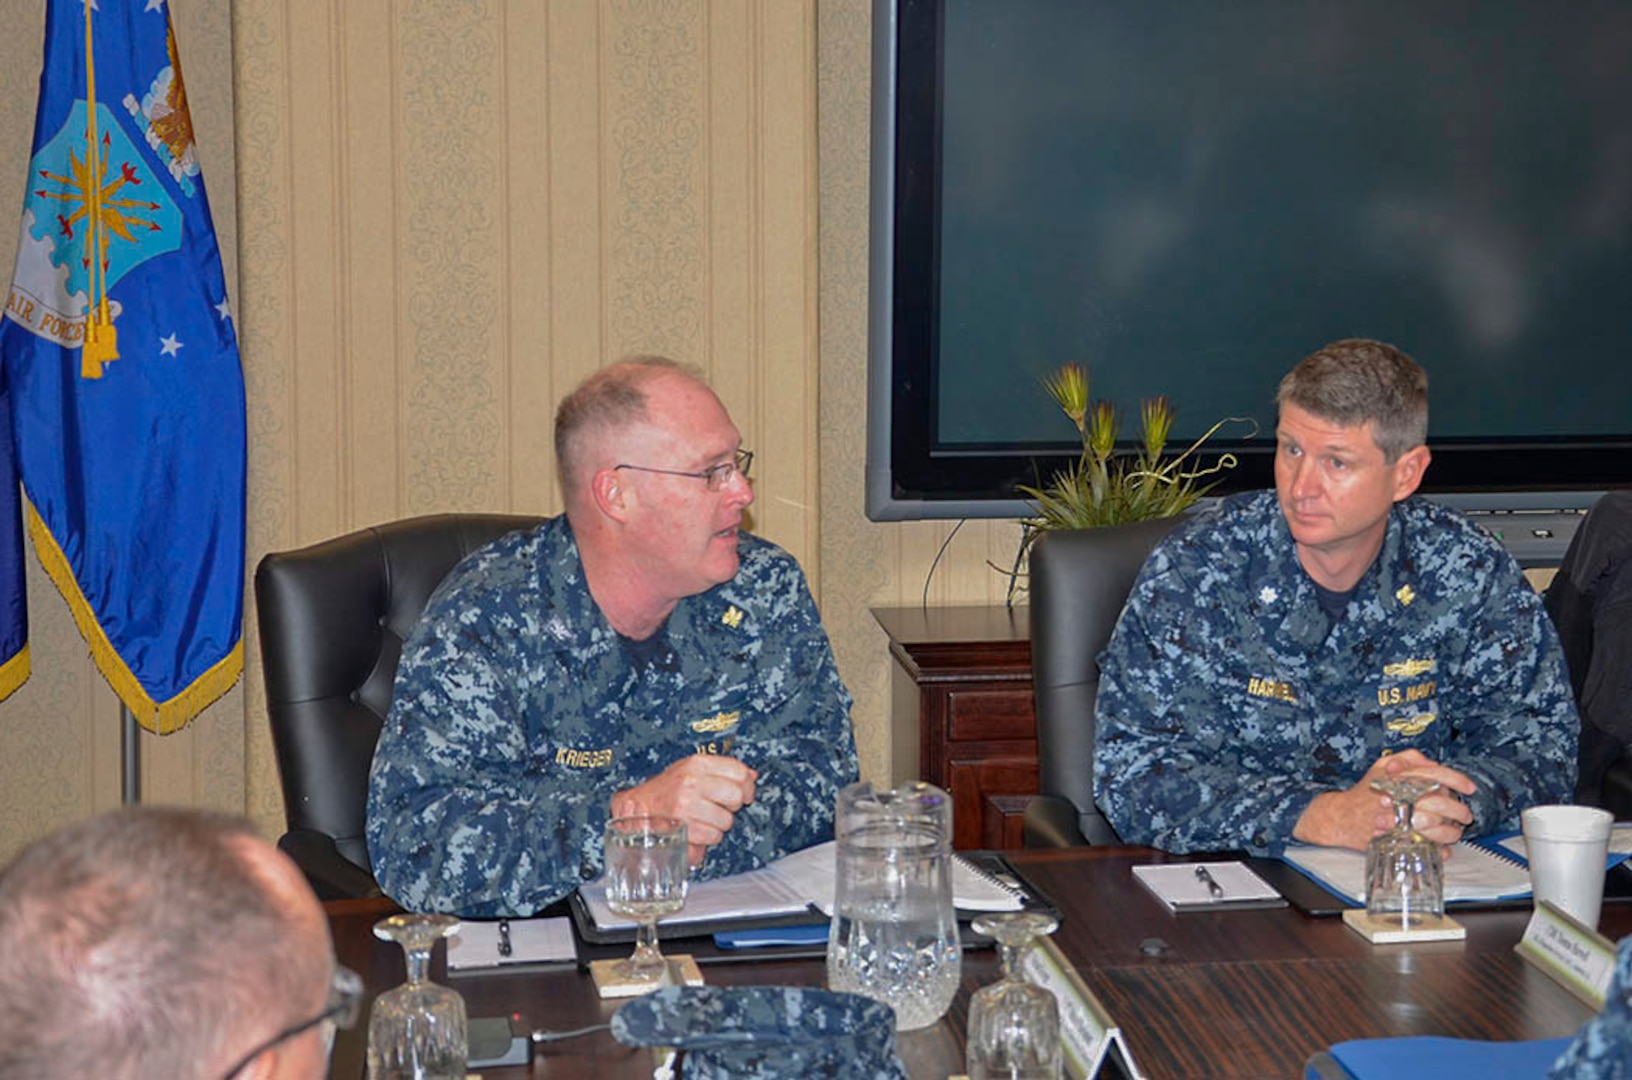 Navy Capt. Michael Krieger, the outgoing Joint Team Lead, thanks everyone for their support during his tour of duty. 